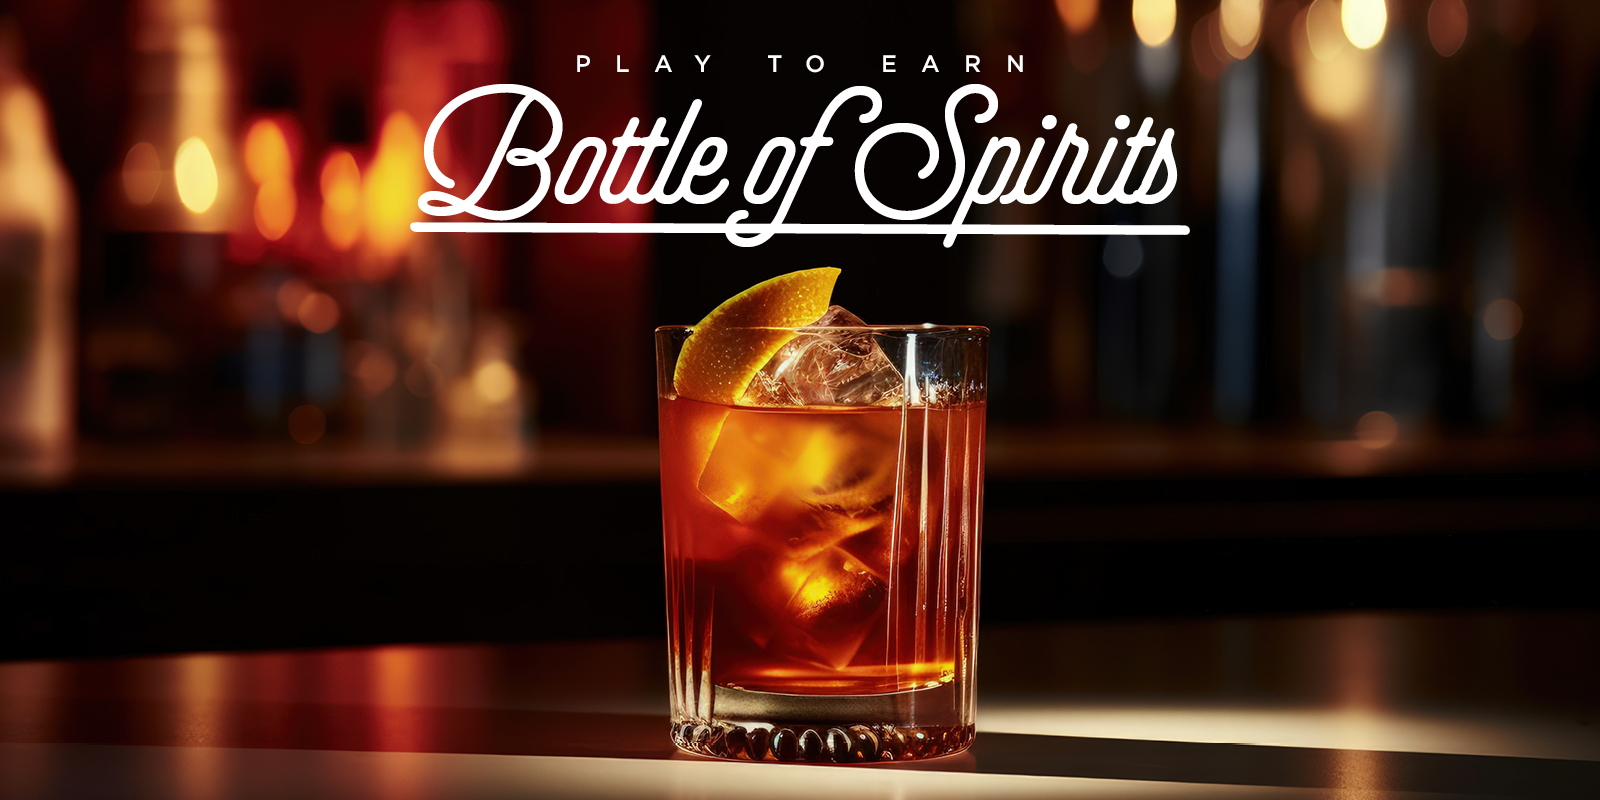 Play to Earn Bottle of Spirits creative showing a glass of brown liquor with an orange peel on ice